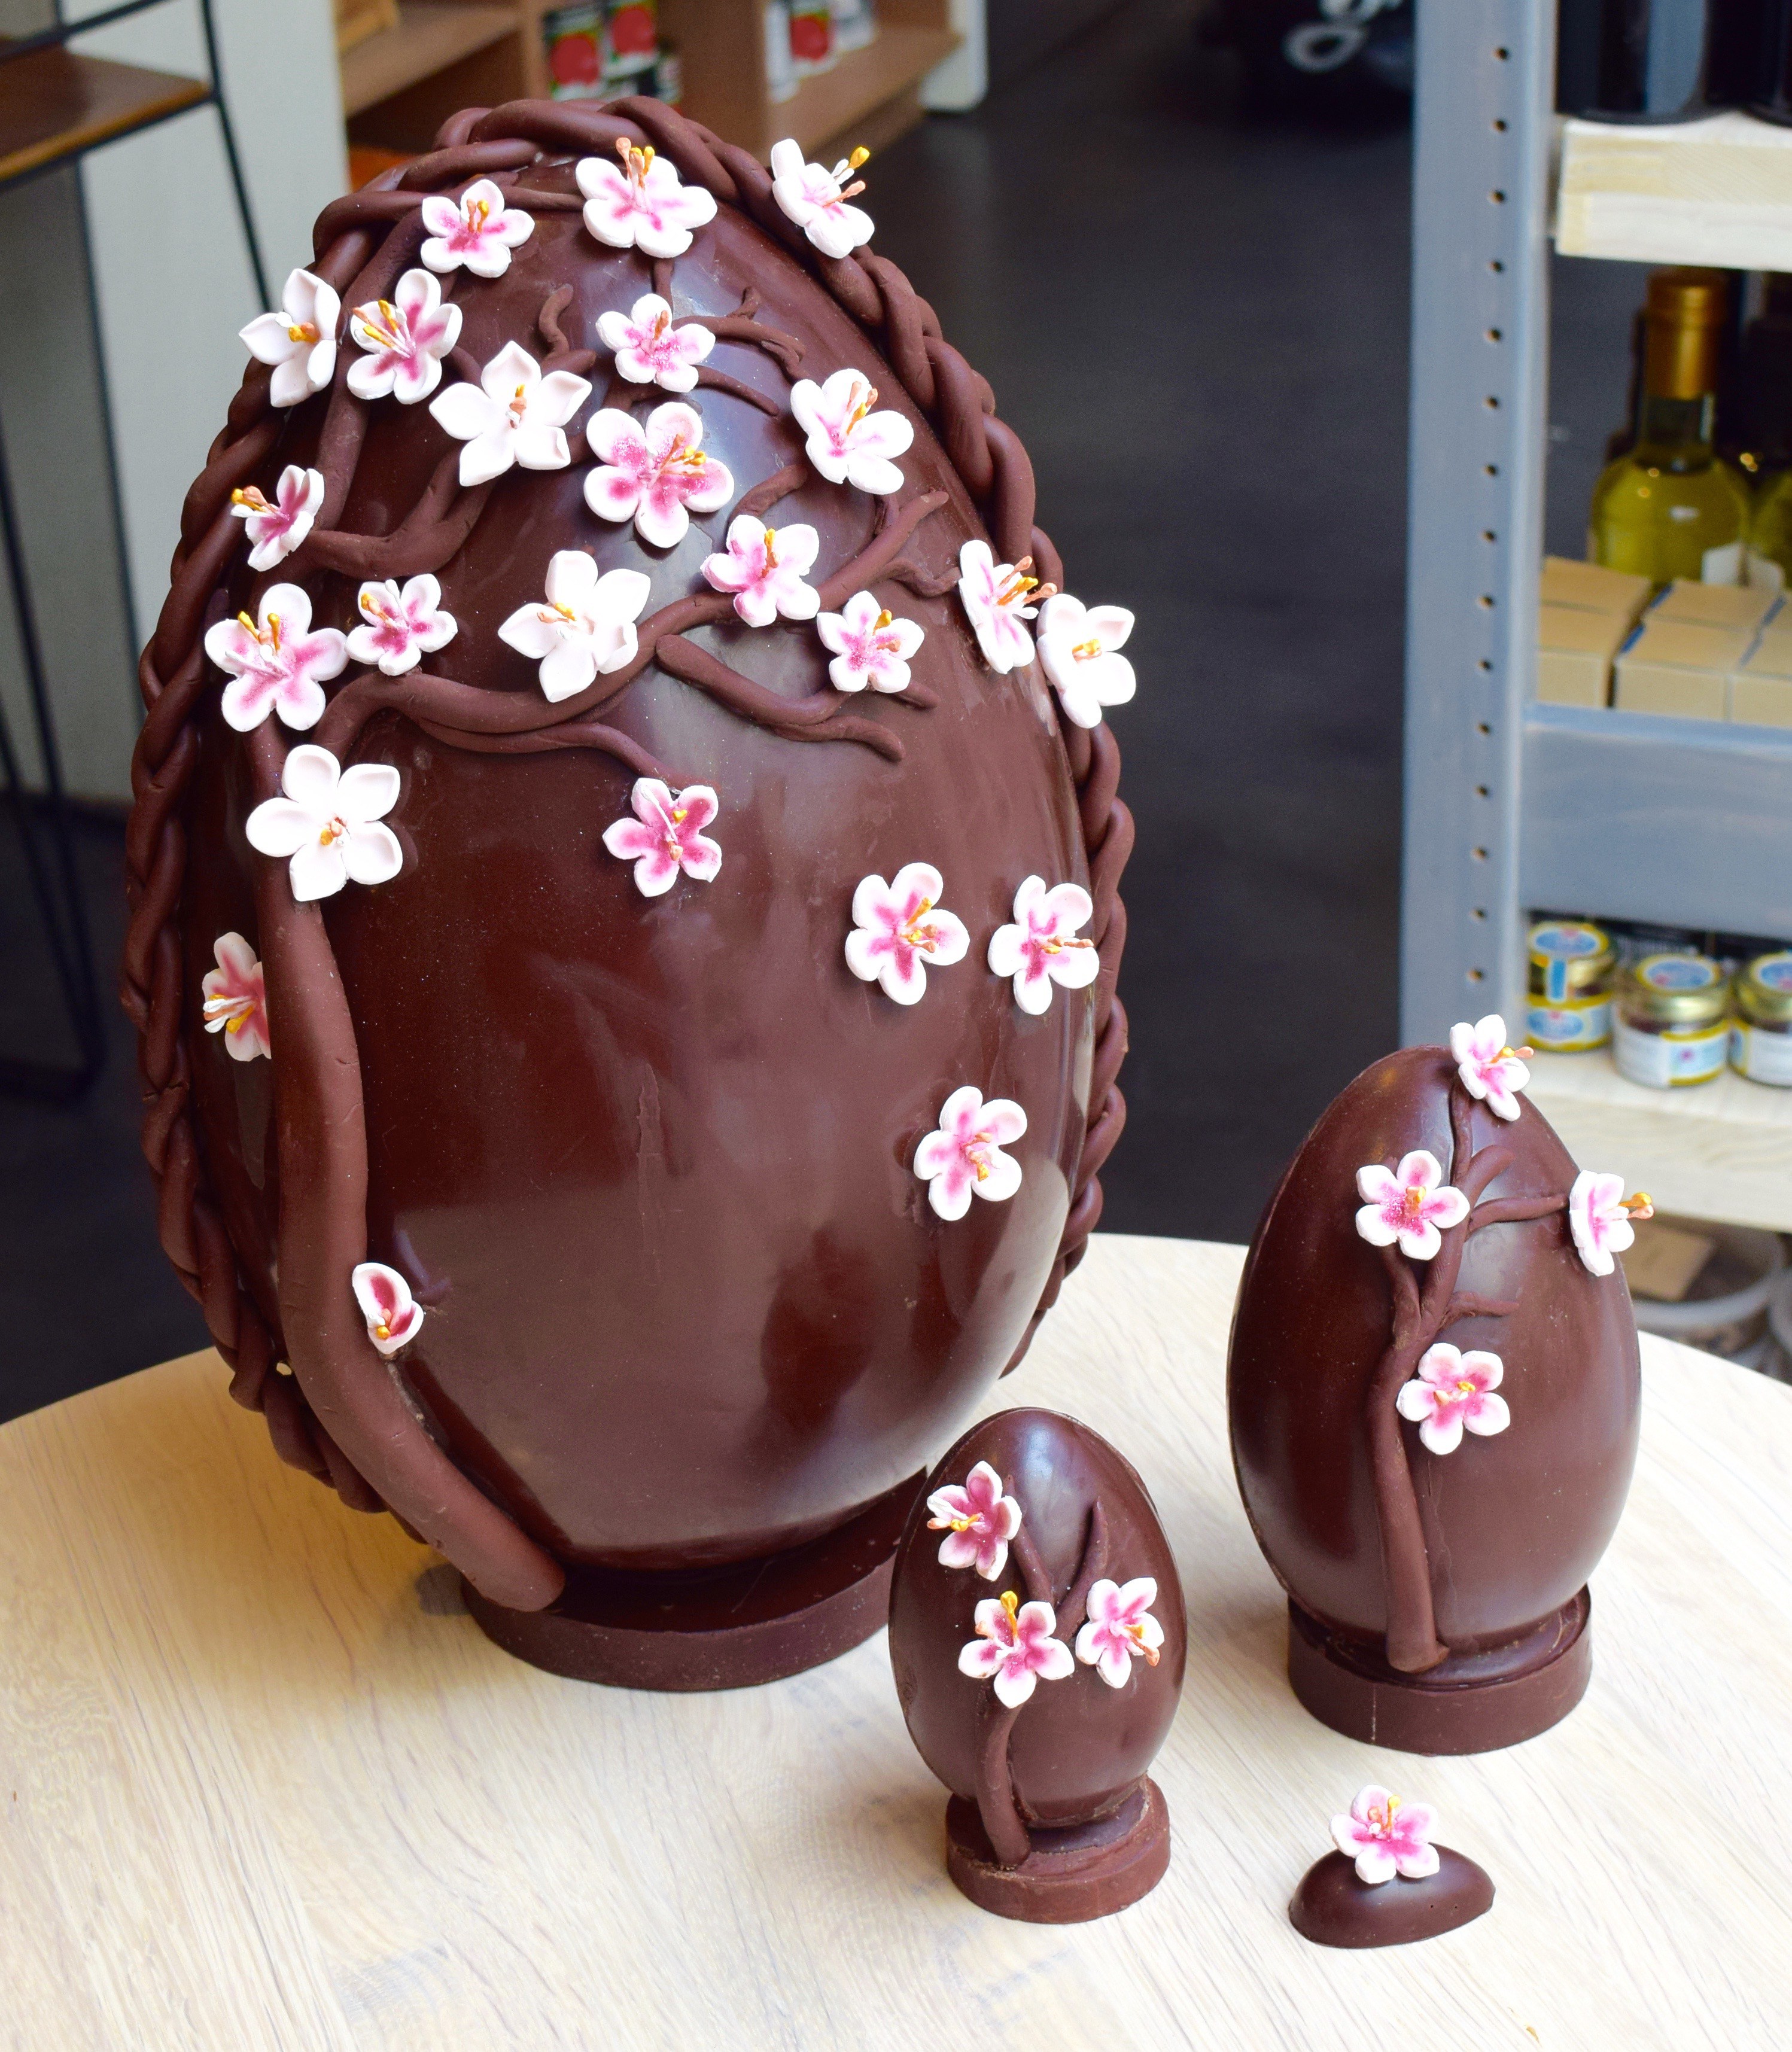 Centrolina is selling chocolate Easter eggs and baskets through Sunday. Pictured here is the large 30-pound display egg along with the 40-, 8.75- and 3.5-ounce eggs. (Photo: Centrolina)